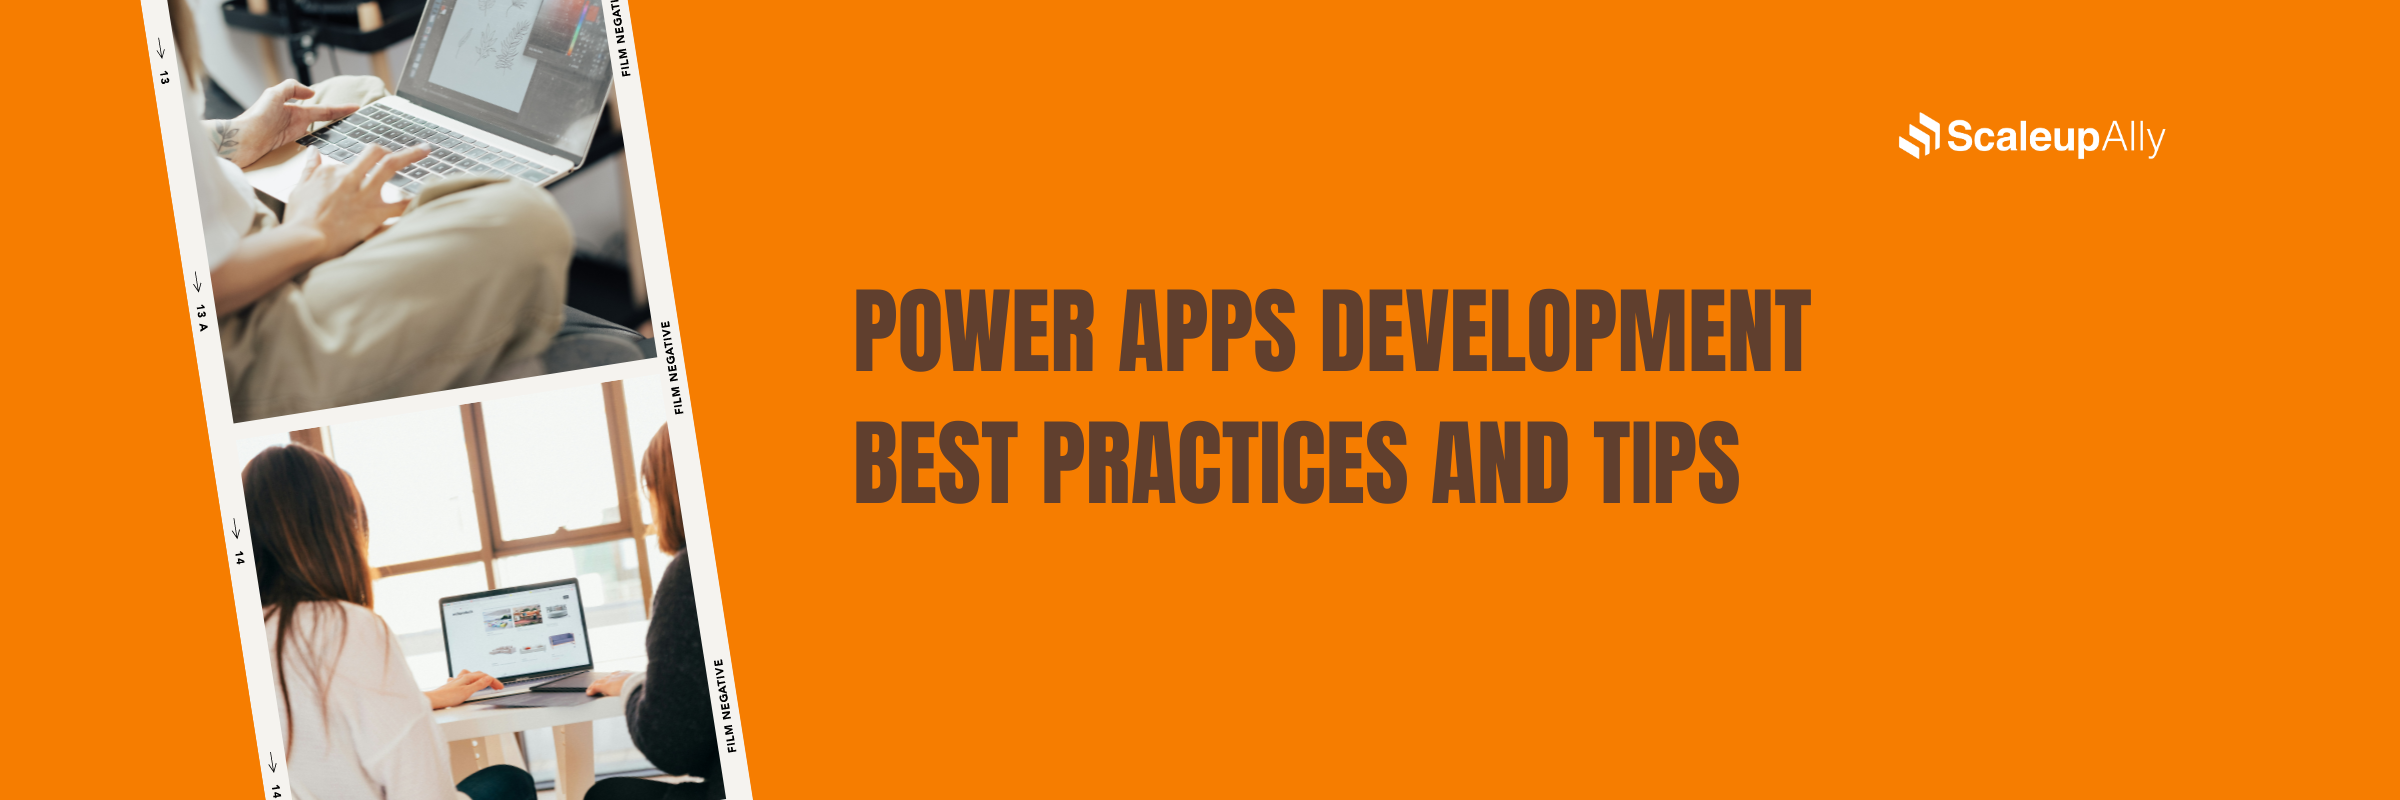 Power Apps Development Best Practices and Tips